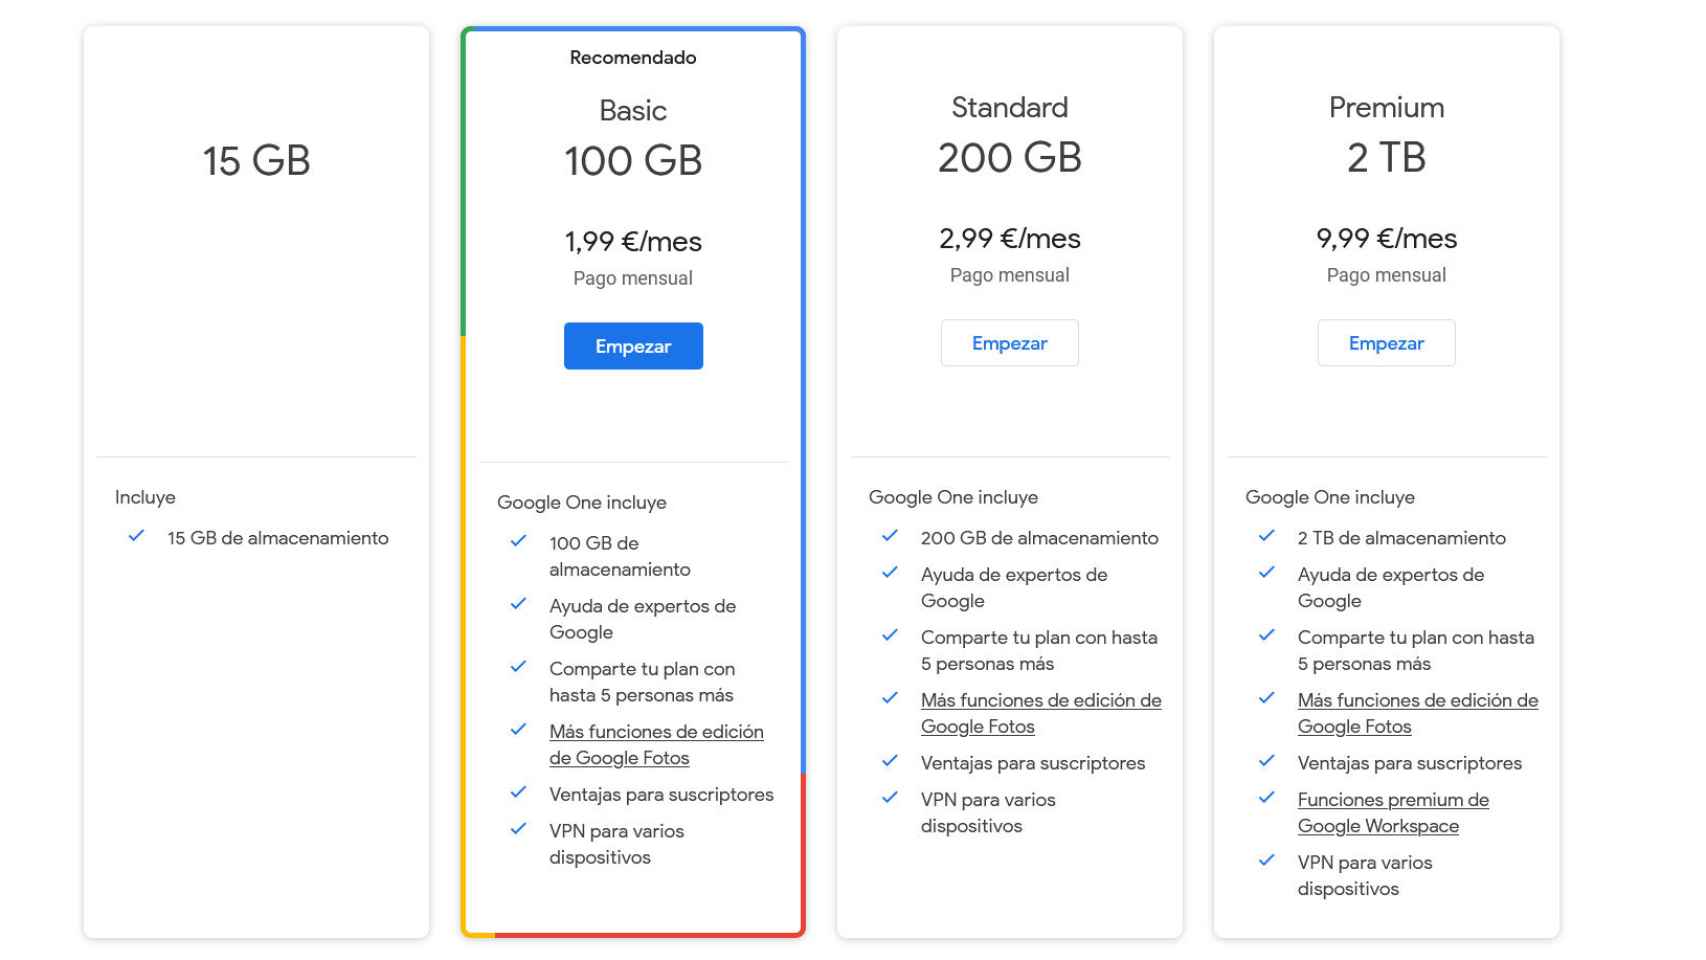 Google One plans, all with built-in VPN